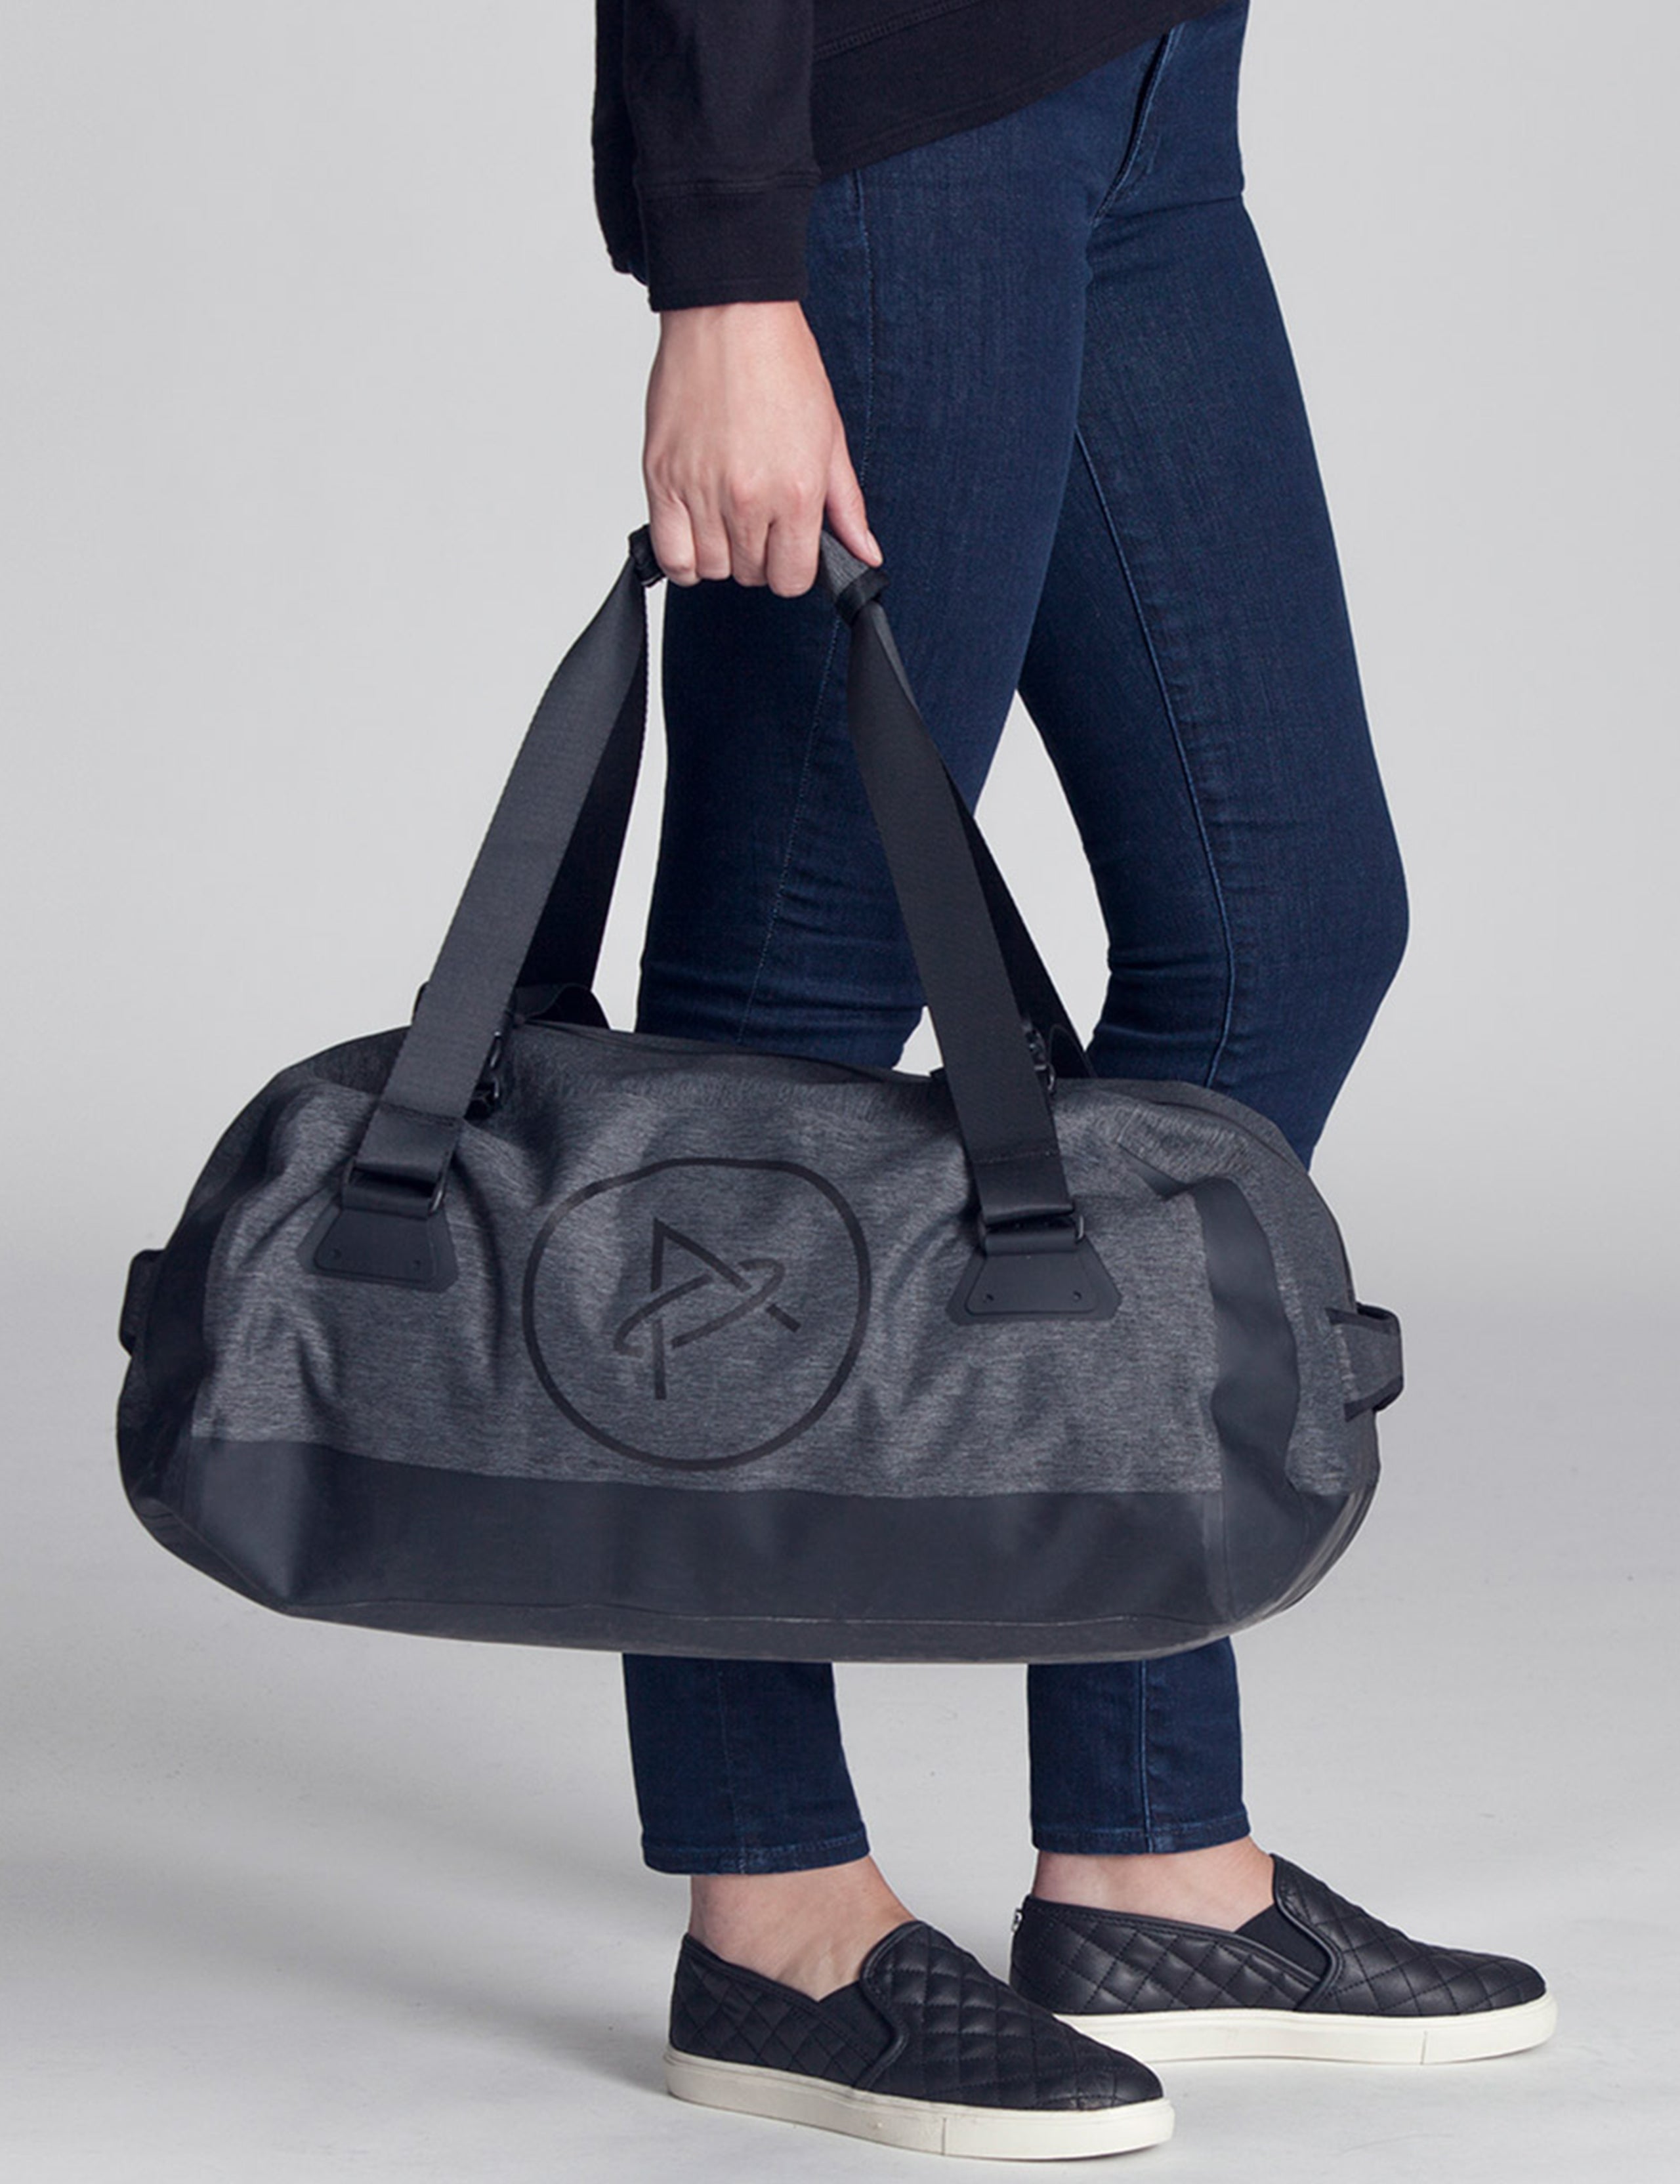 woman holding grey duffle bag from AETHER Apparel